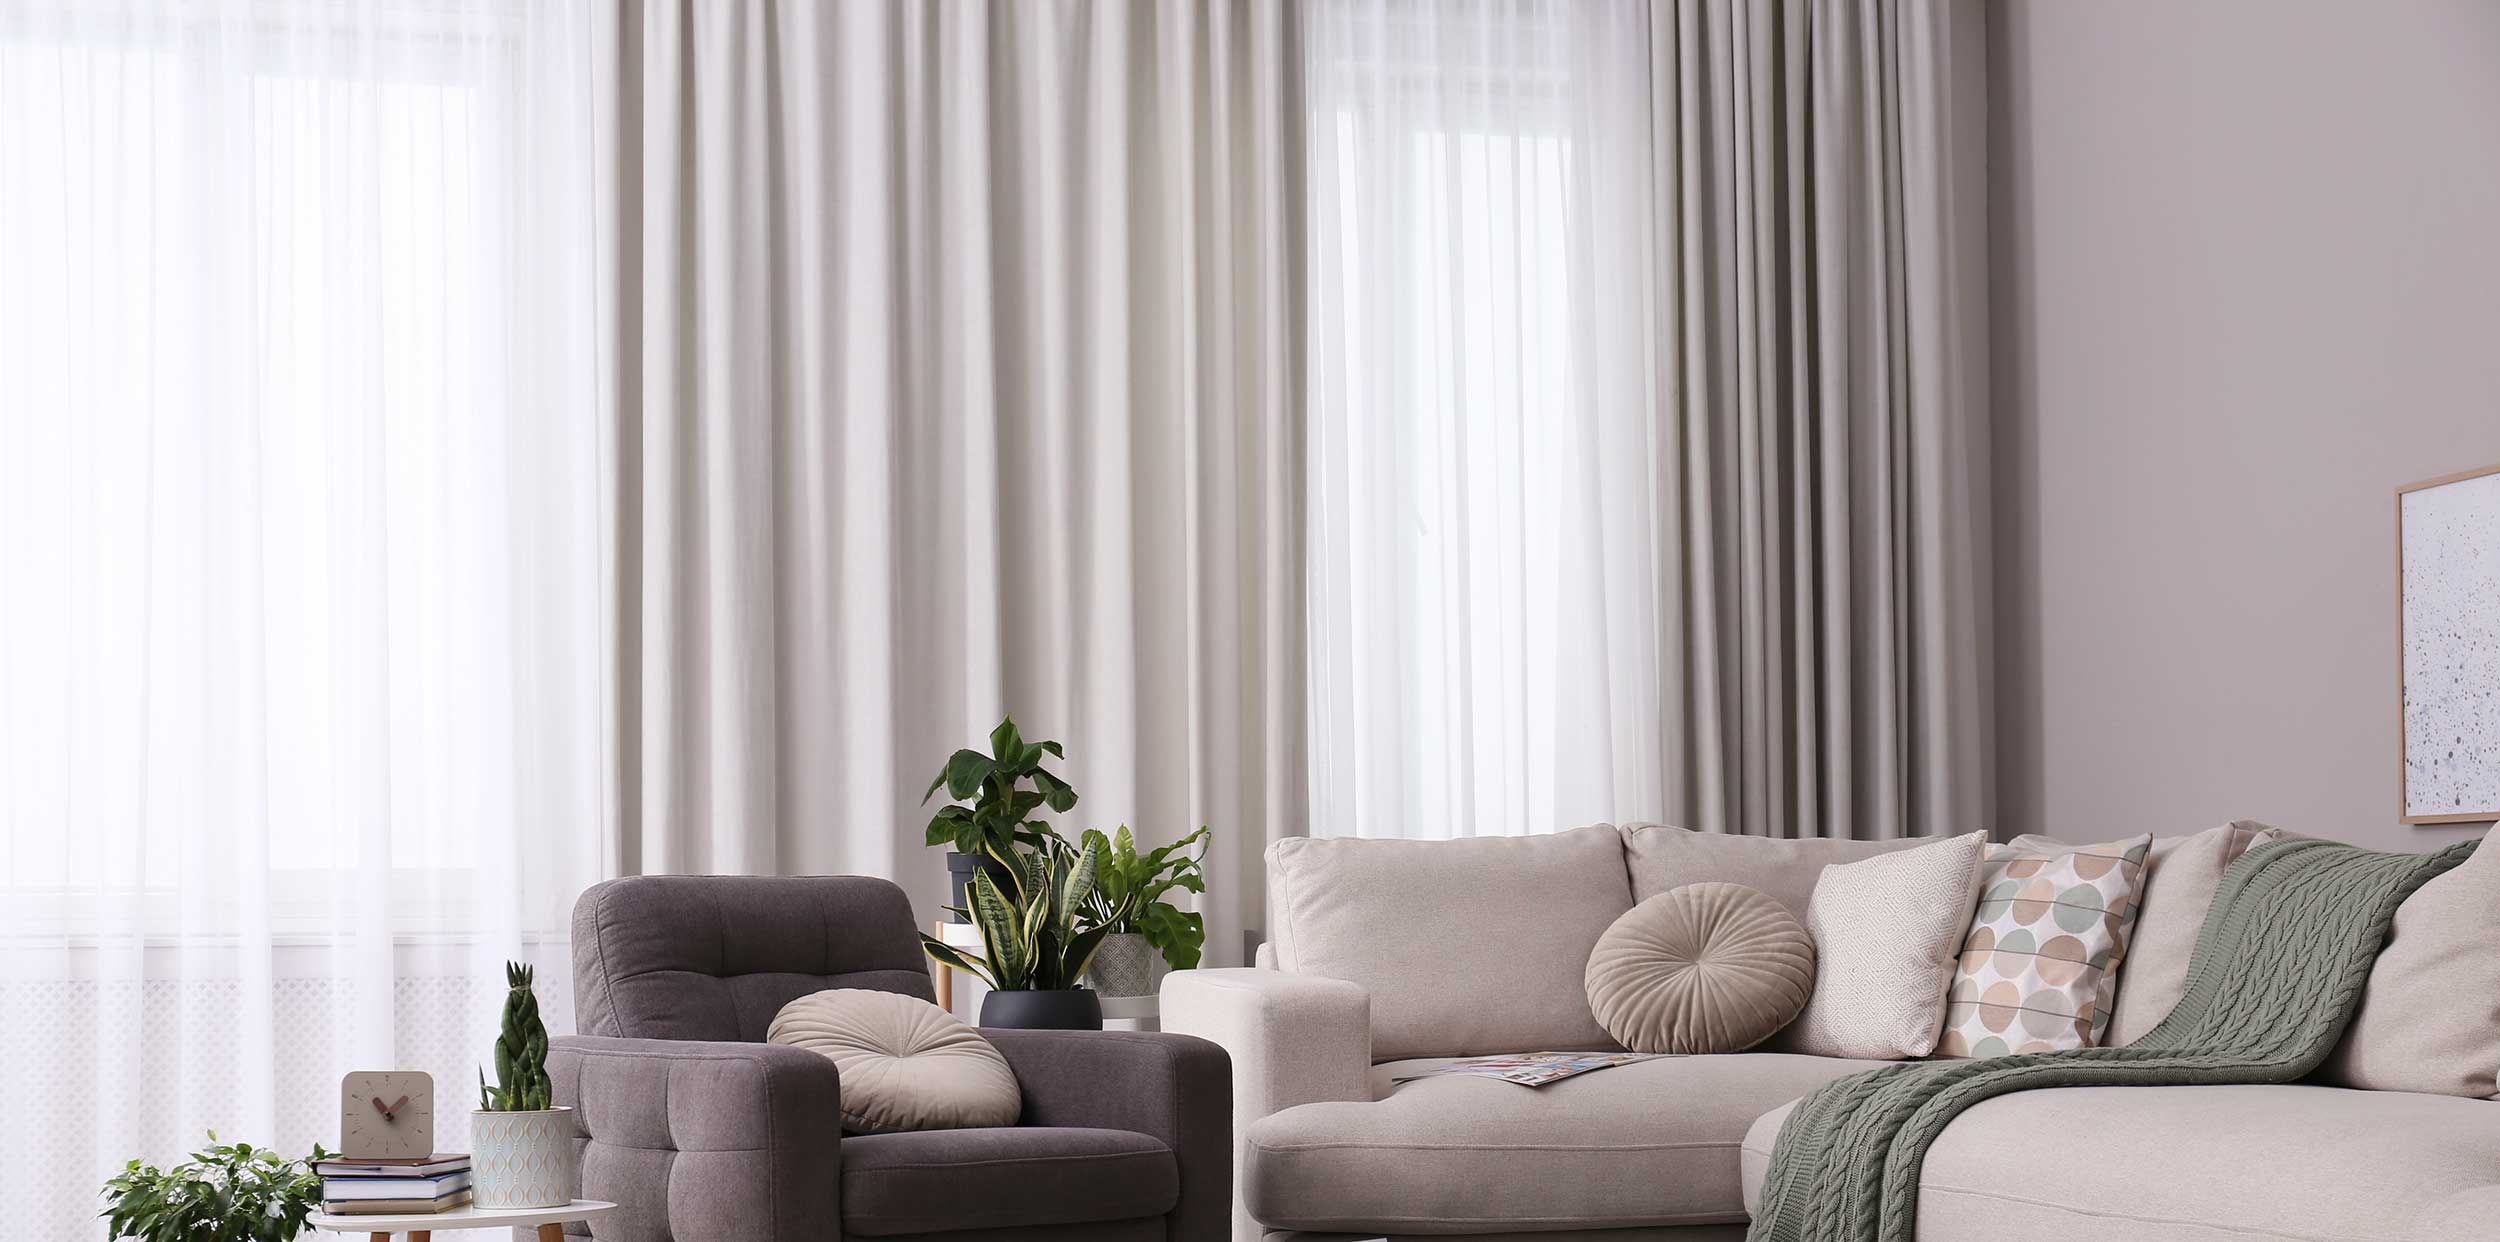 window treatments upgrade the style of your home